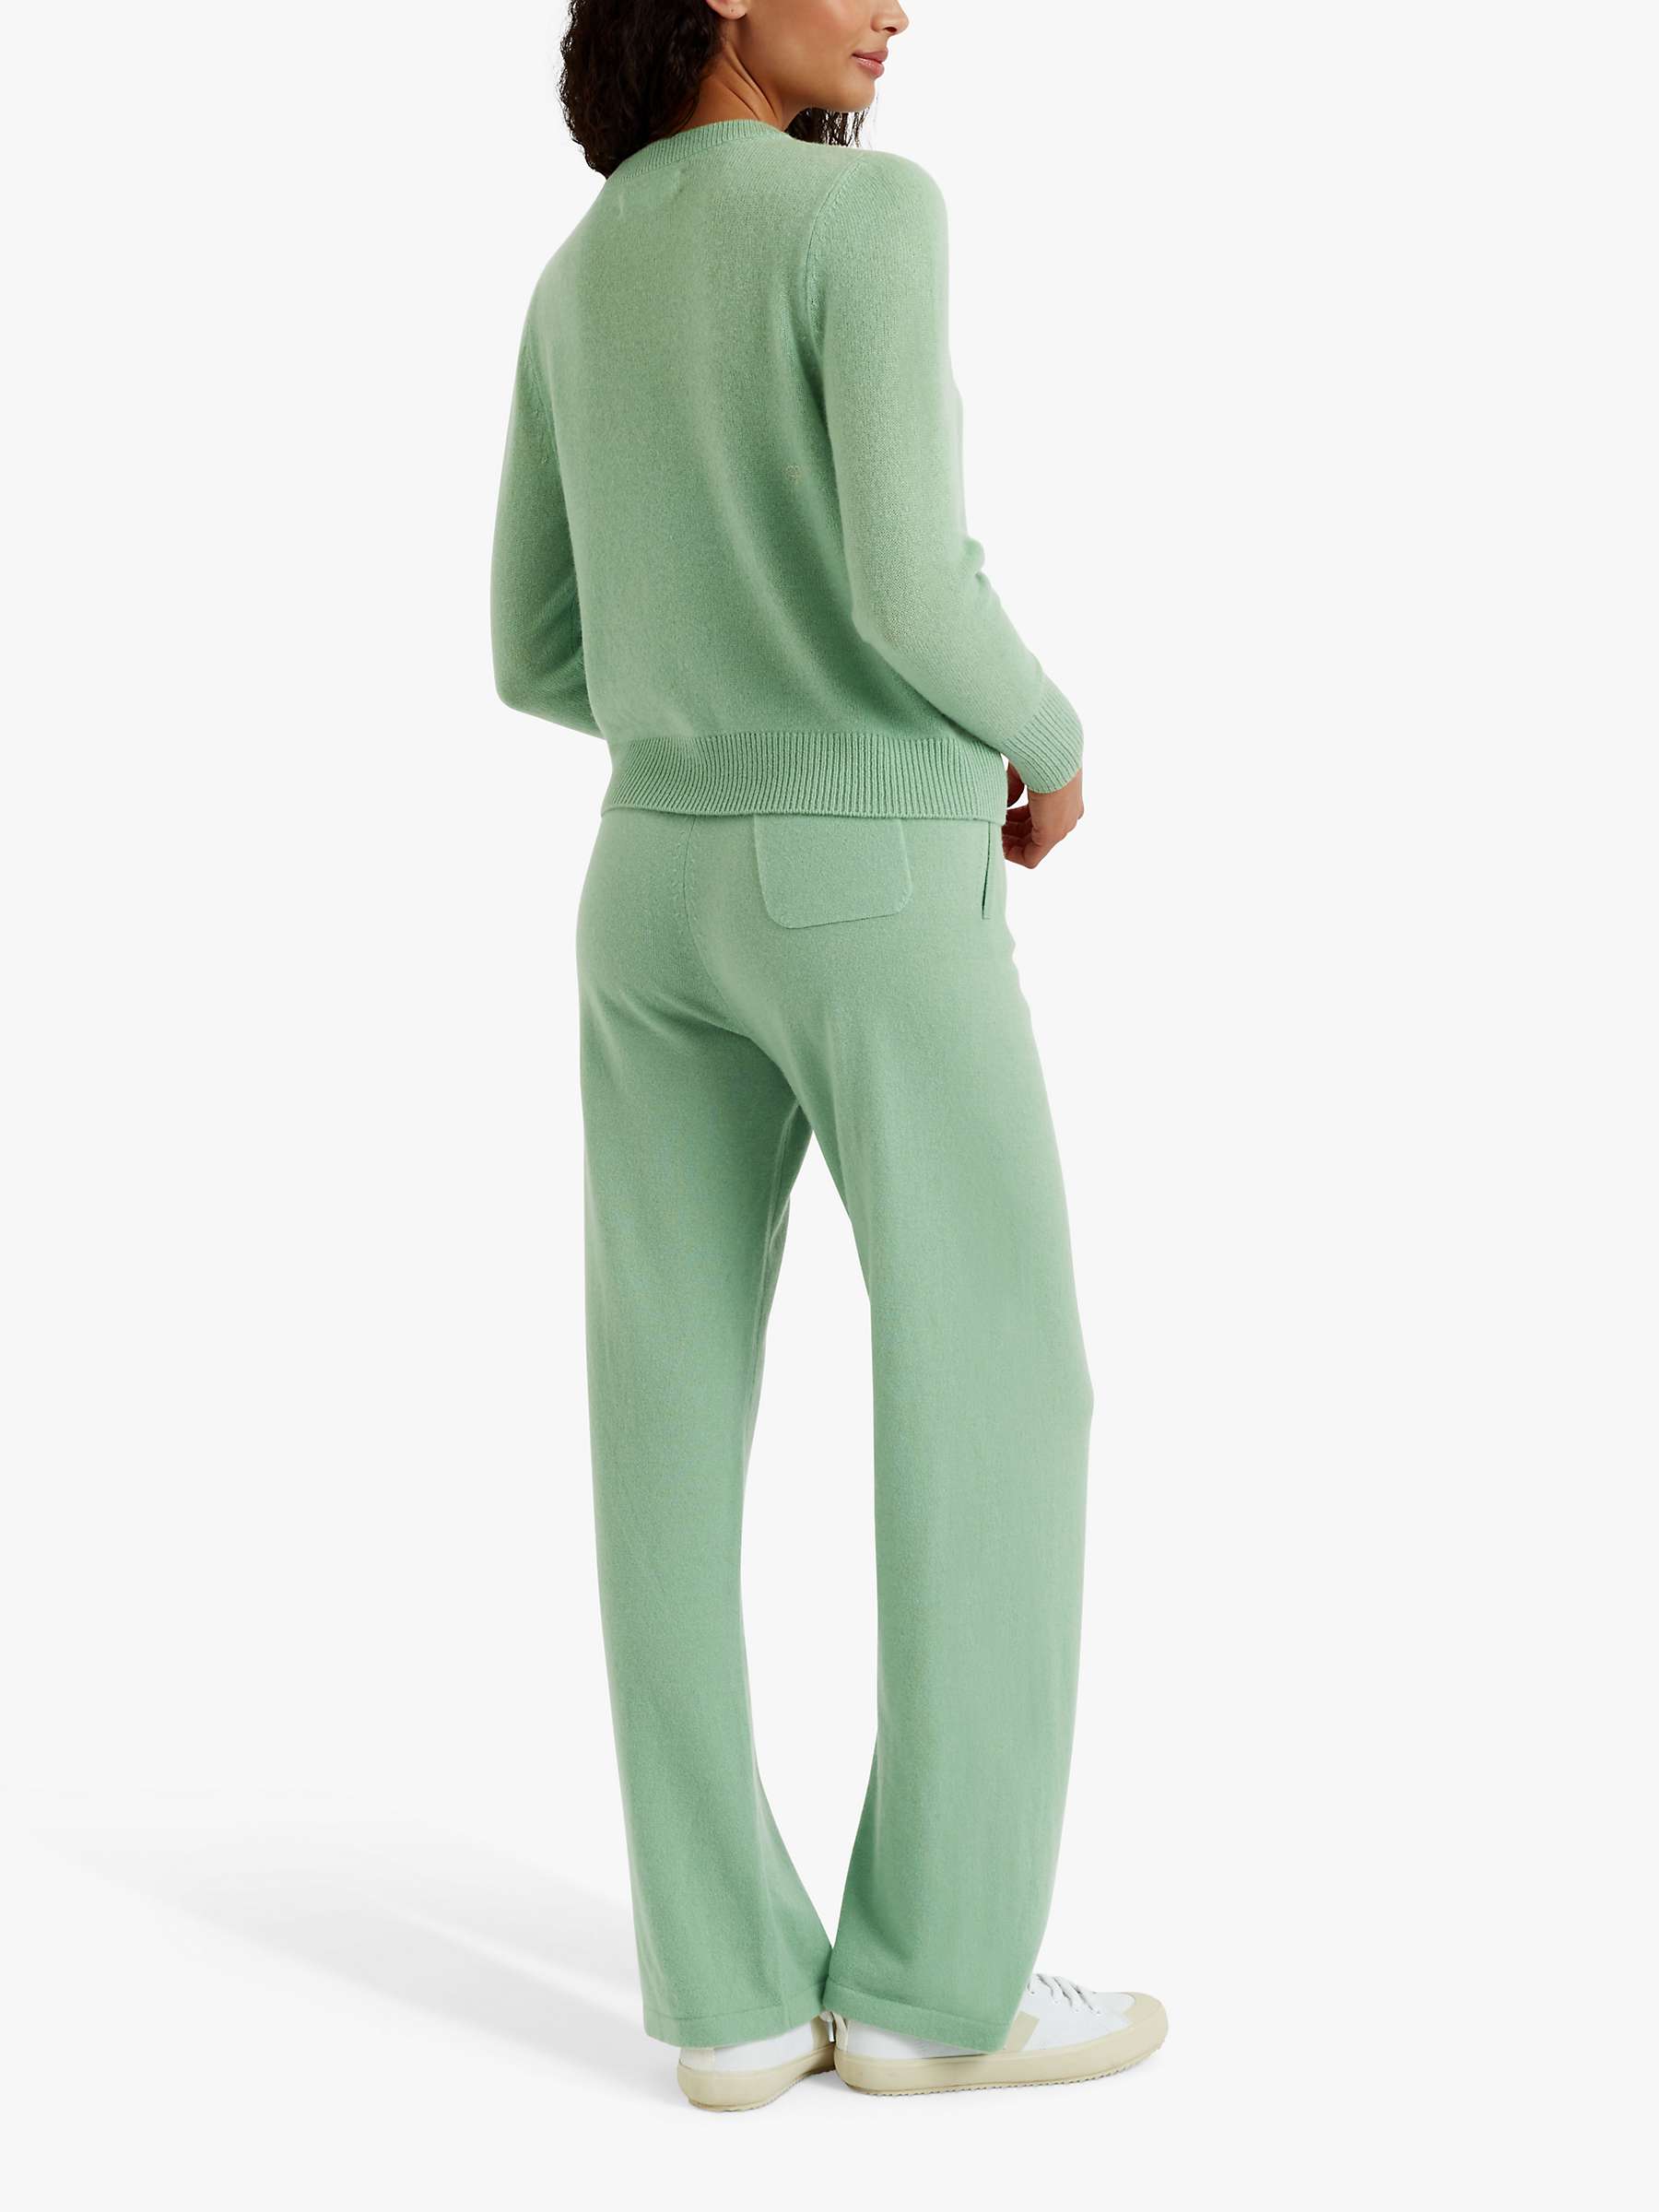 Buy Chinti & Parker Cashmere Wide Leg Trousers Online at johnlewis.com